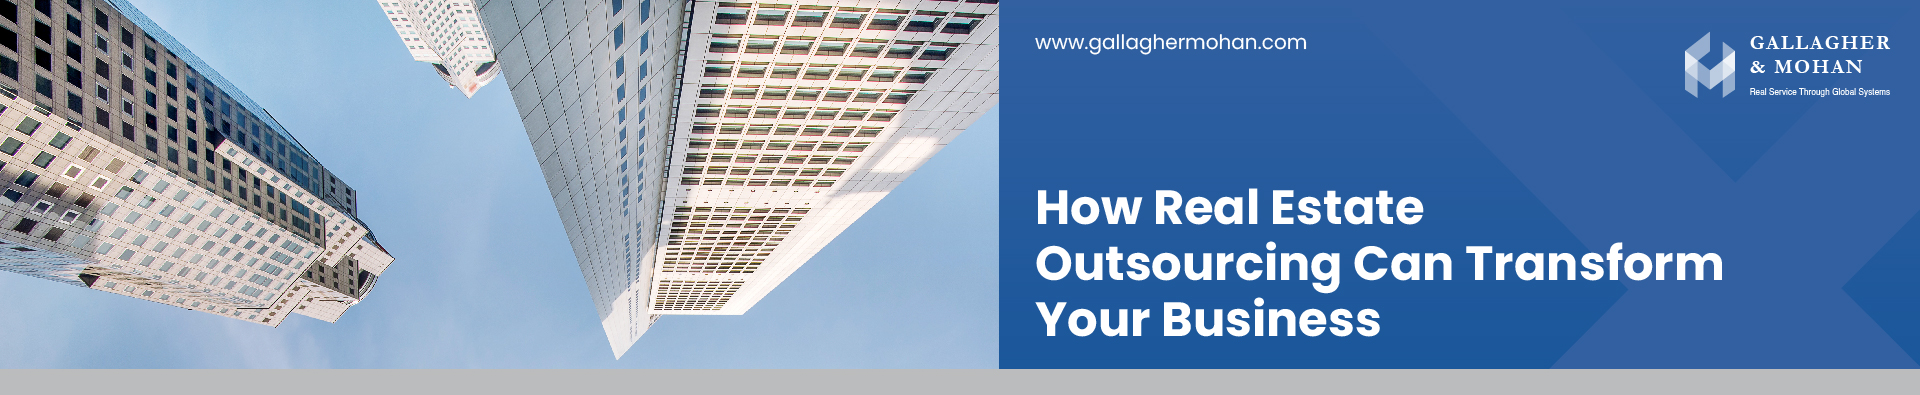 How Real Estate Outsourcing Can Transform Your Business